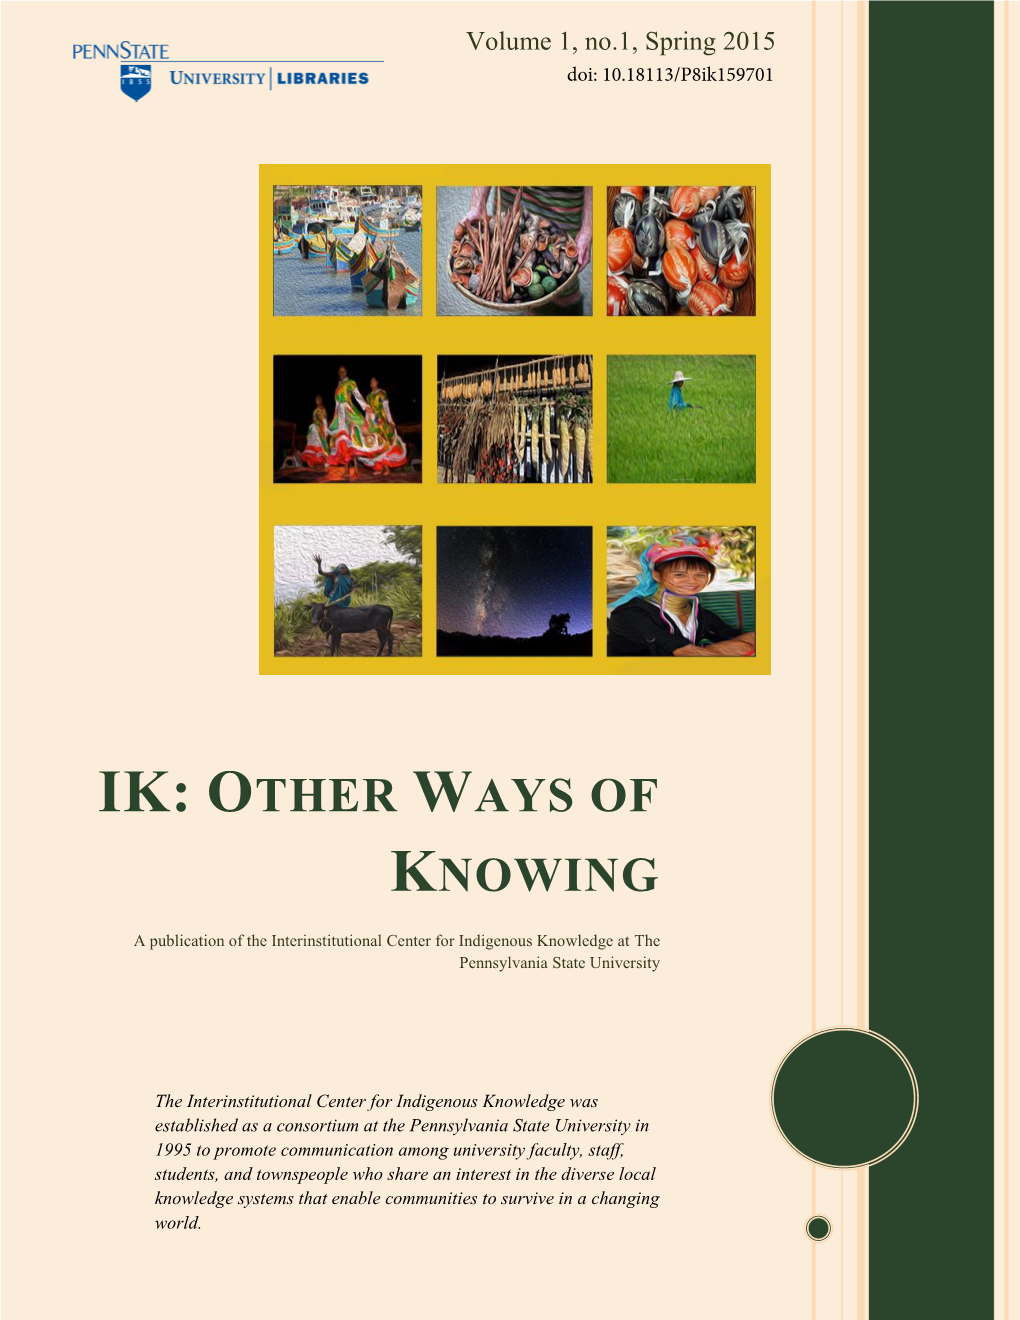 Ik: Other Ways of Knowing